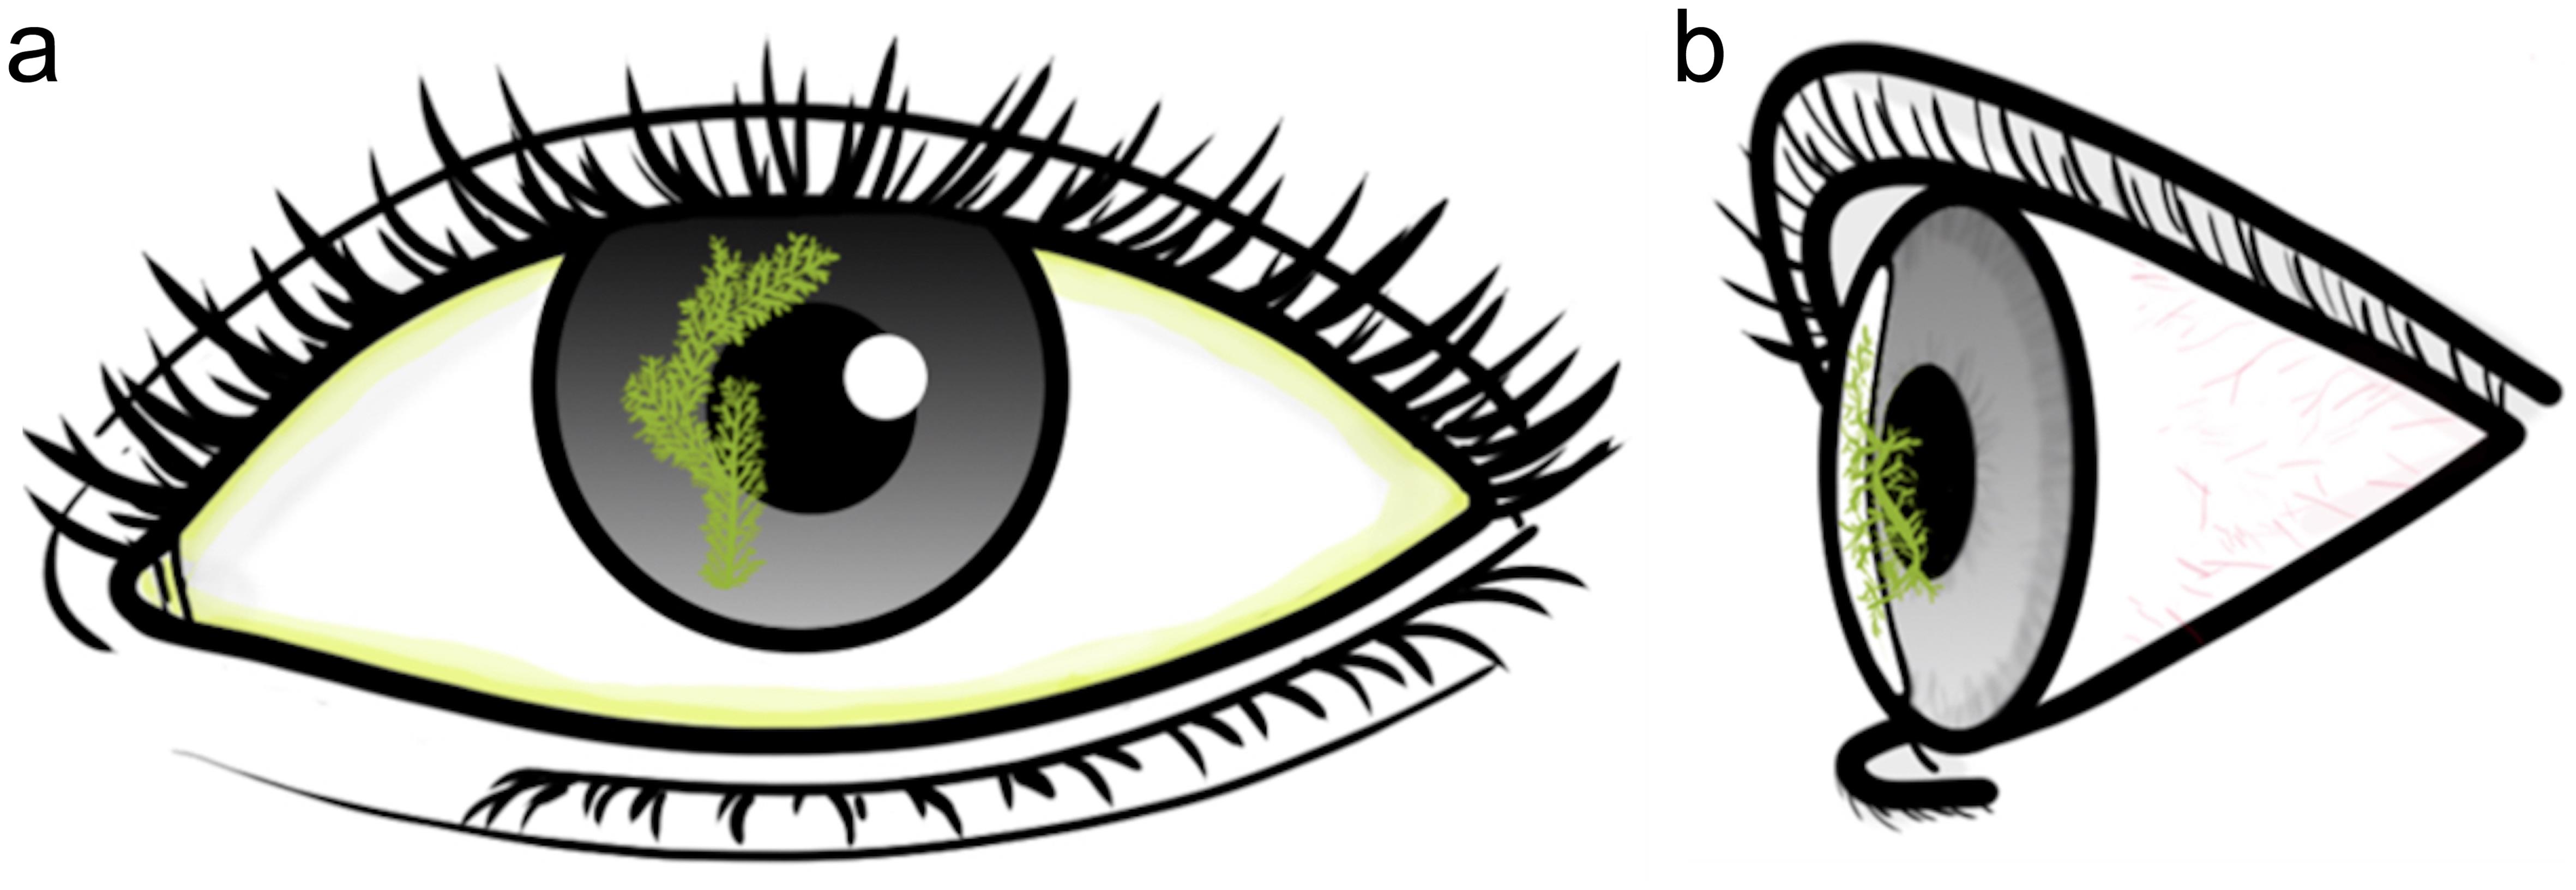 Schematic drawing of an eye with a typical dendritic ulcer on the cornea, resembling branches of a tree with the greenish-yellow color of fluorescent eye drops.